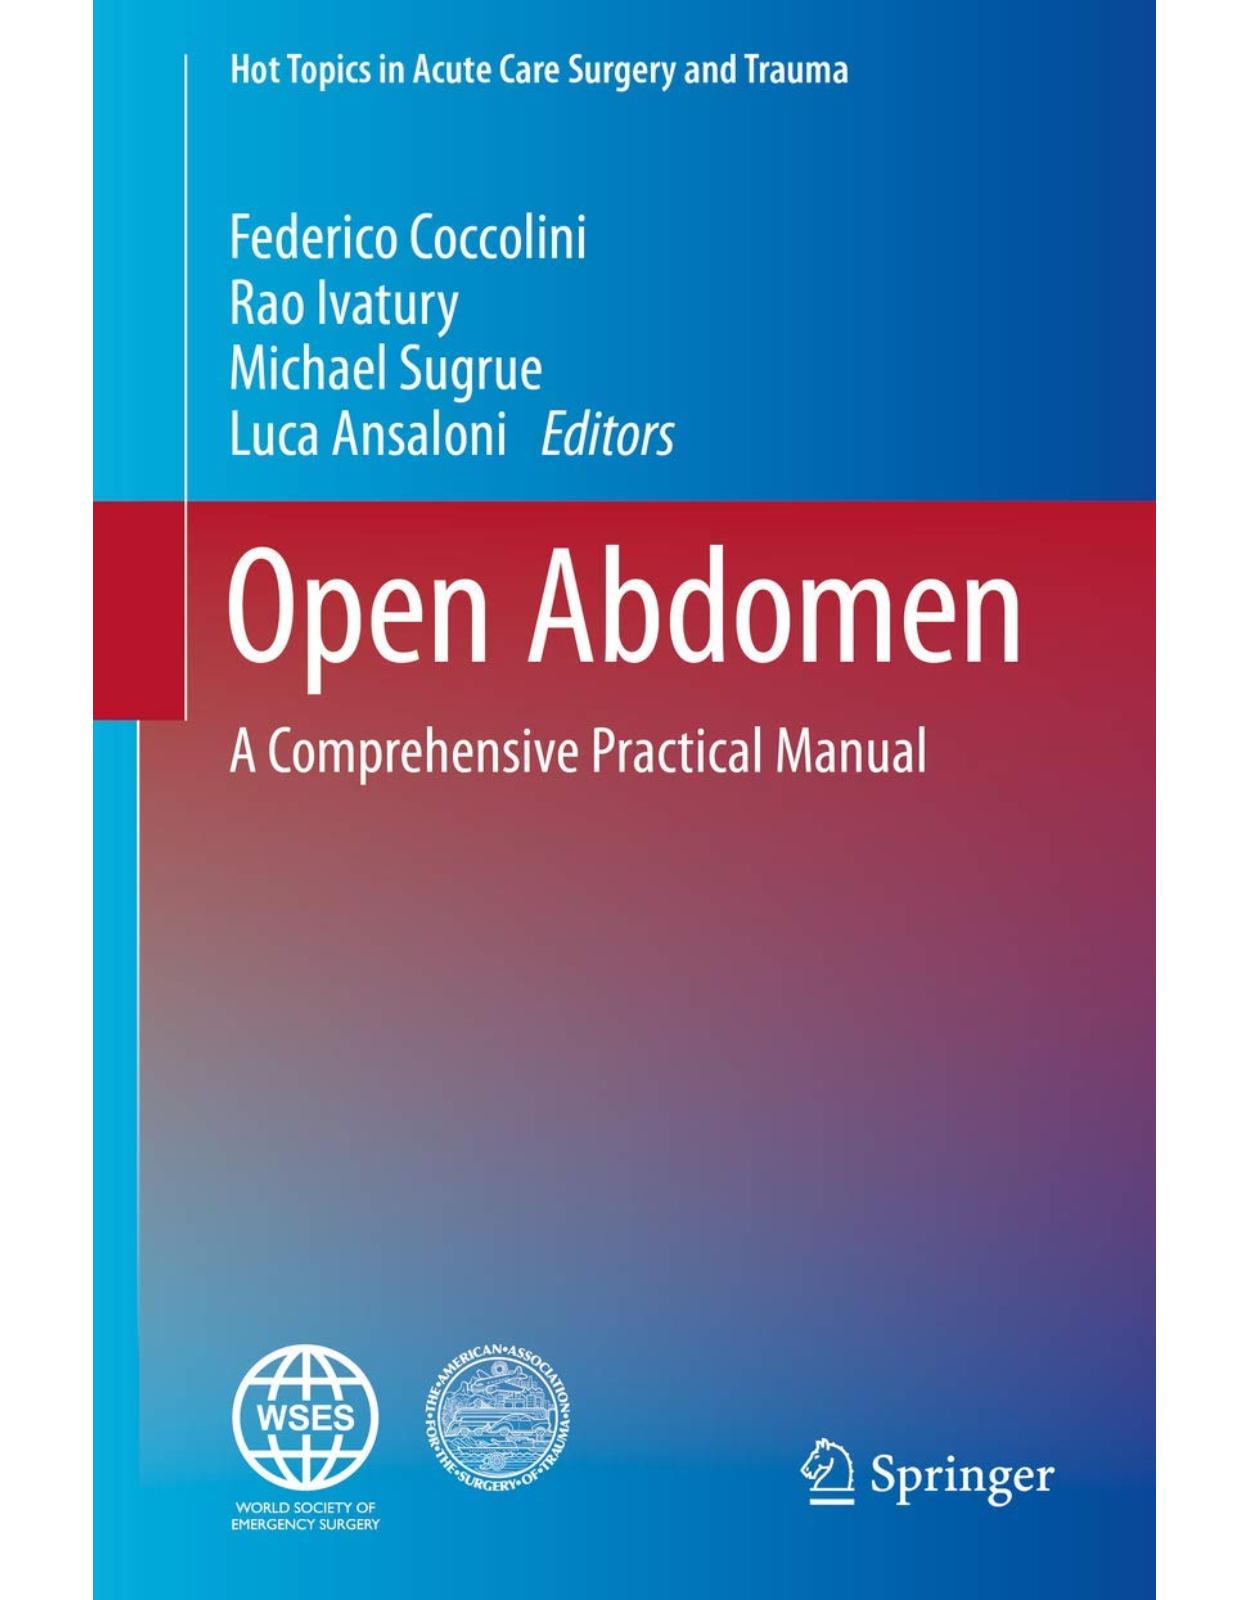 Open Abdomen: A Comprehensive Practical Manual (Hot Topics in Acute Care Surgery and Trauma)